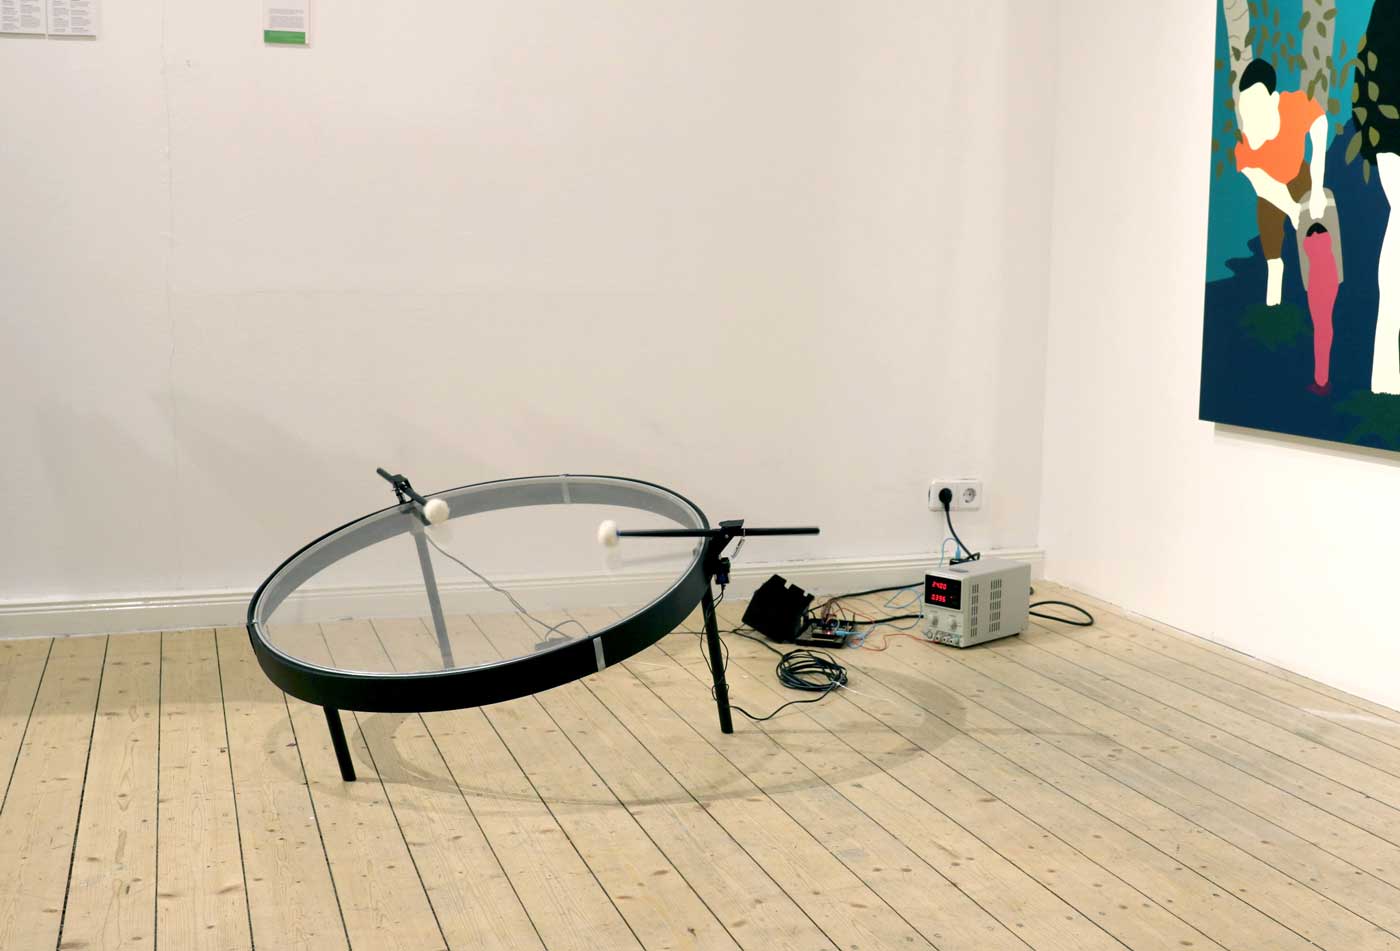 An exhibition photo, an electrical power supply is connect to a power socket, indistinguishable electronics, and a large transparent drum frame being struck by mallets.